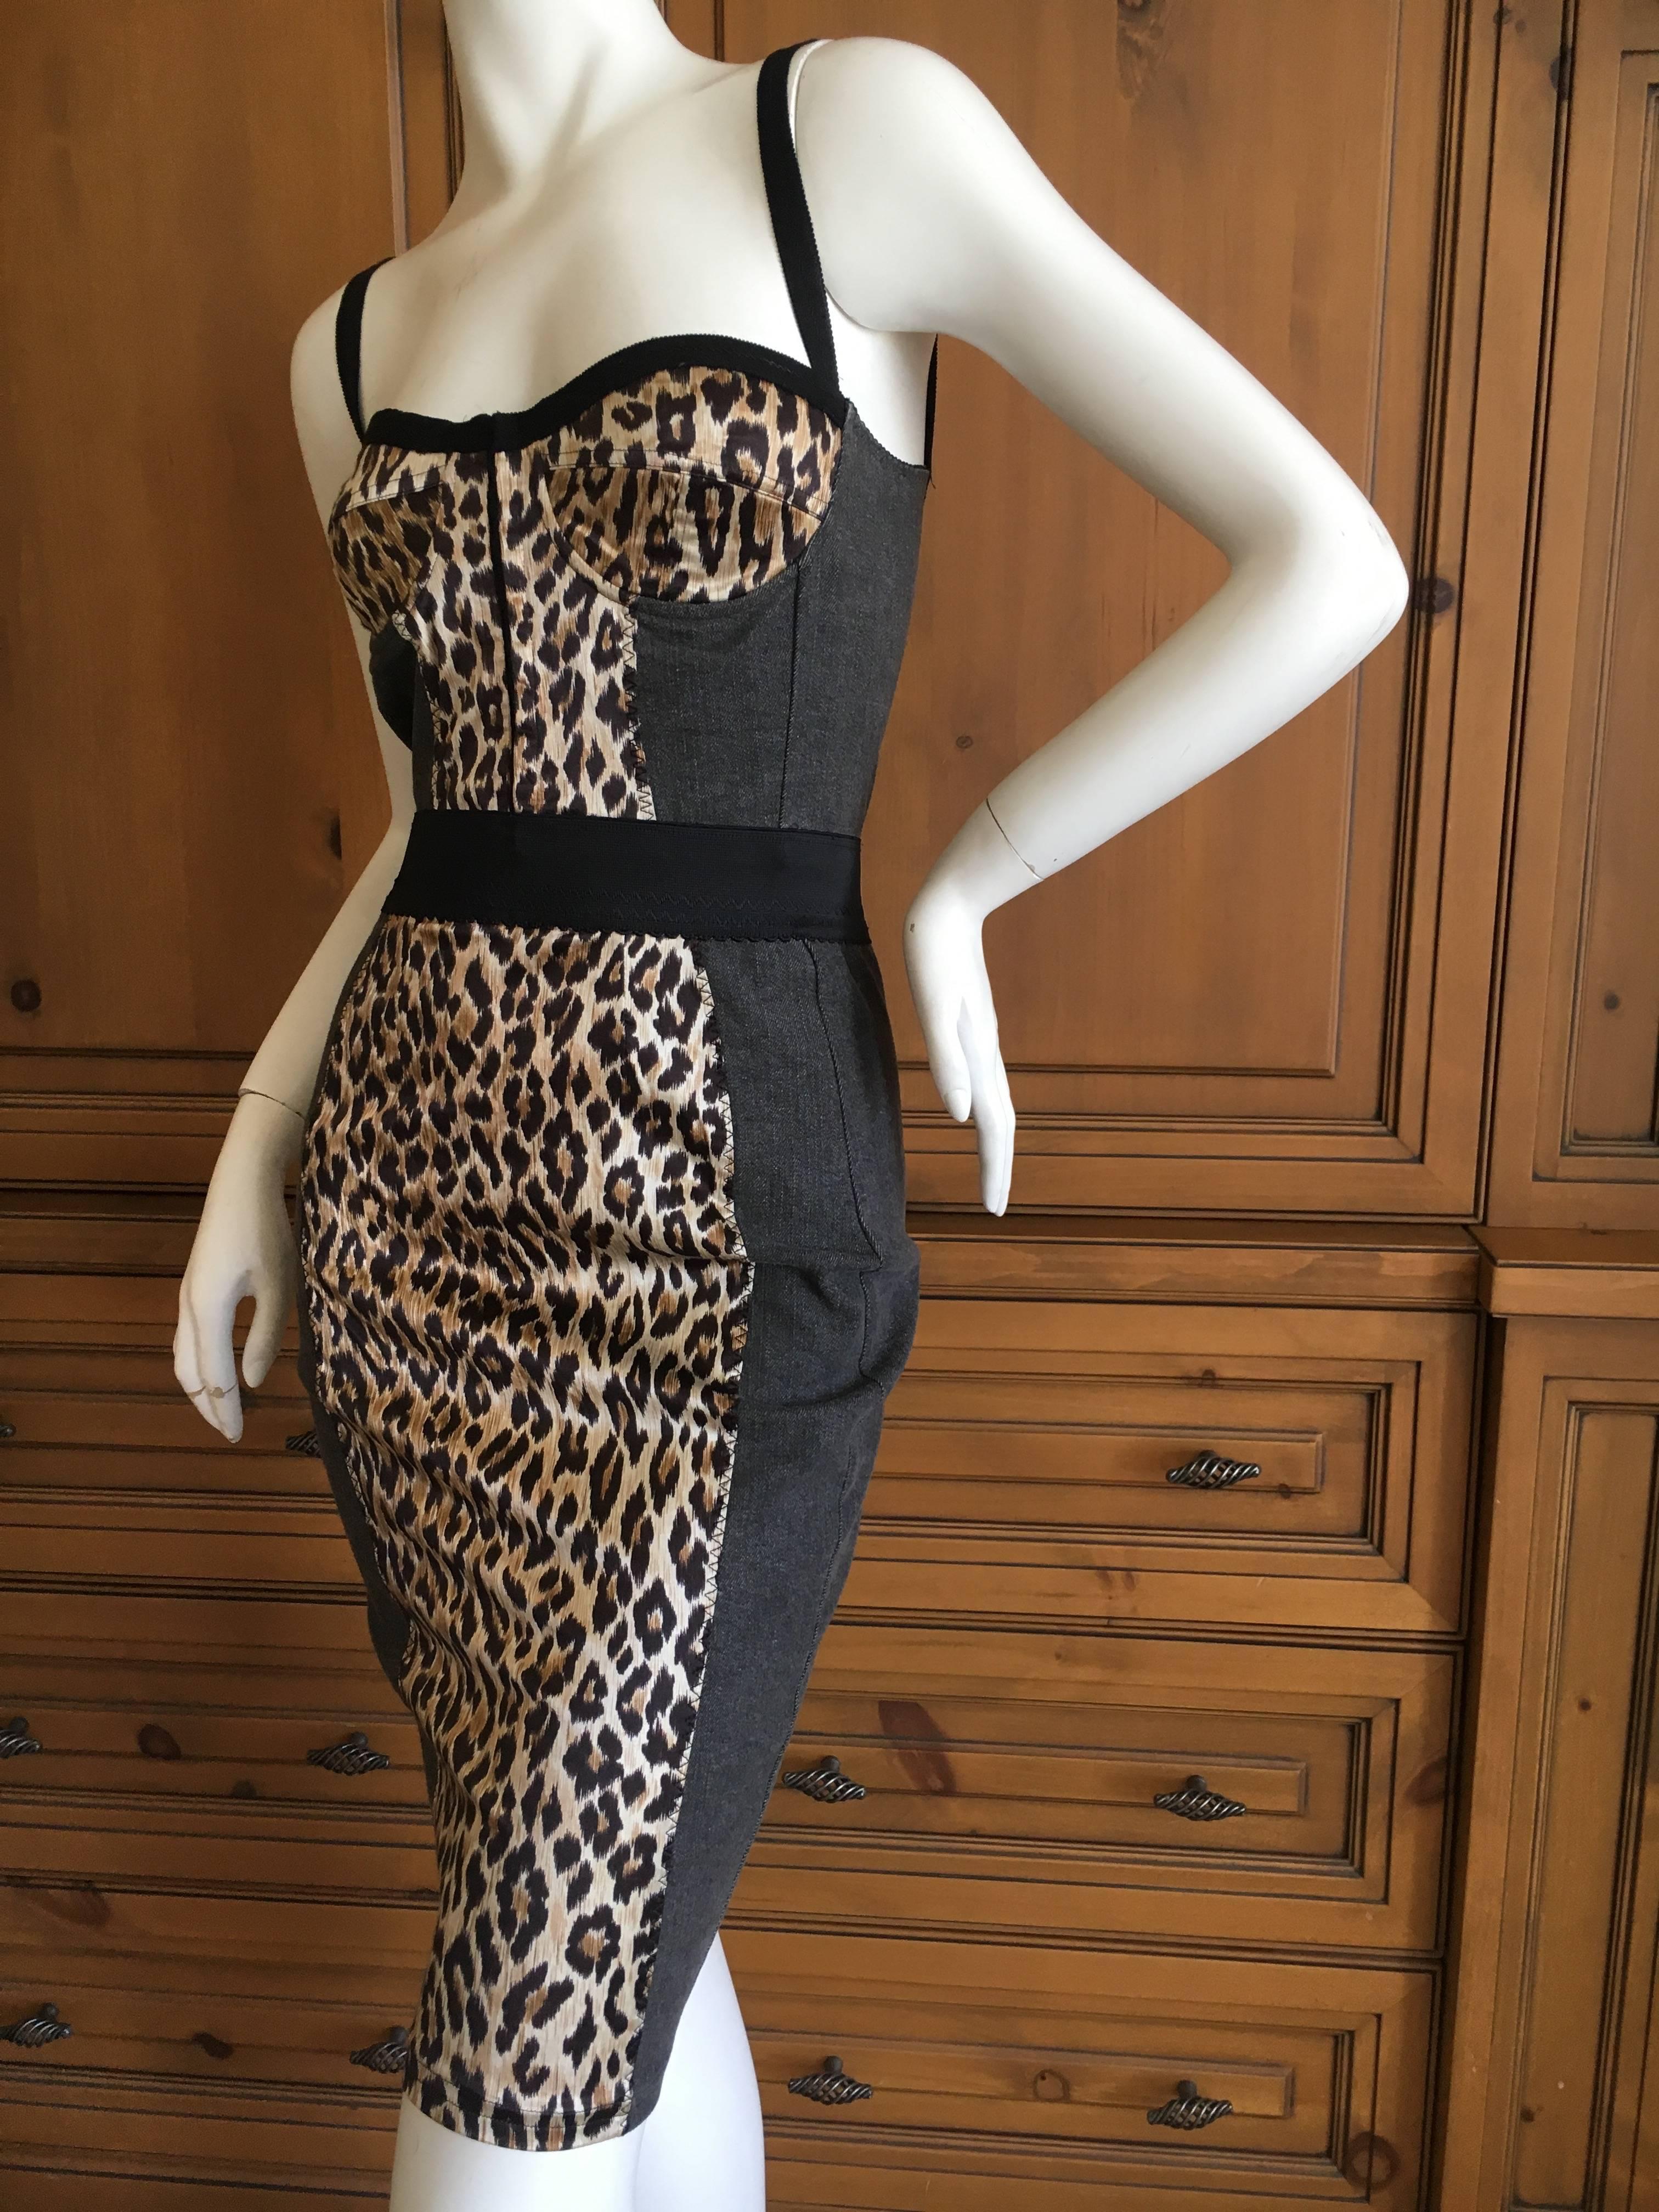 D & G Dolce & Gabbana Vintage Leopard Stretch Dress
This is so sexy and sweet.
Size 40, lot's of stretch
Bust 34